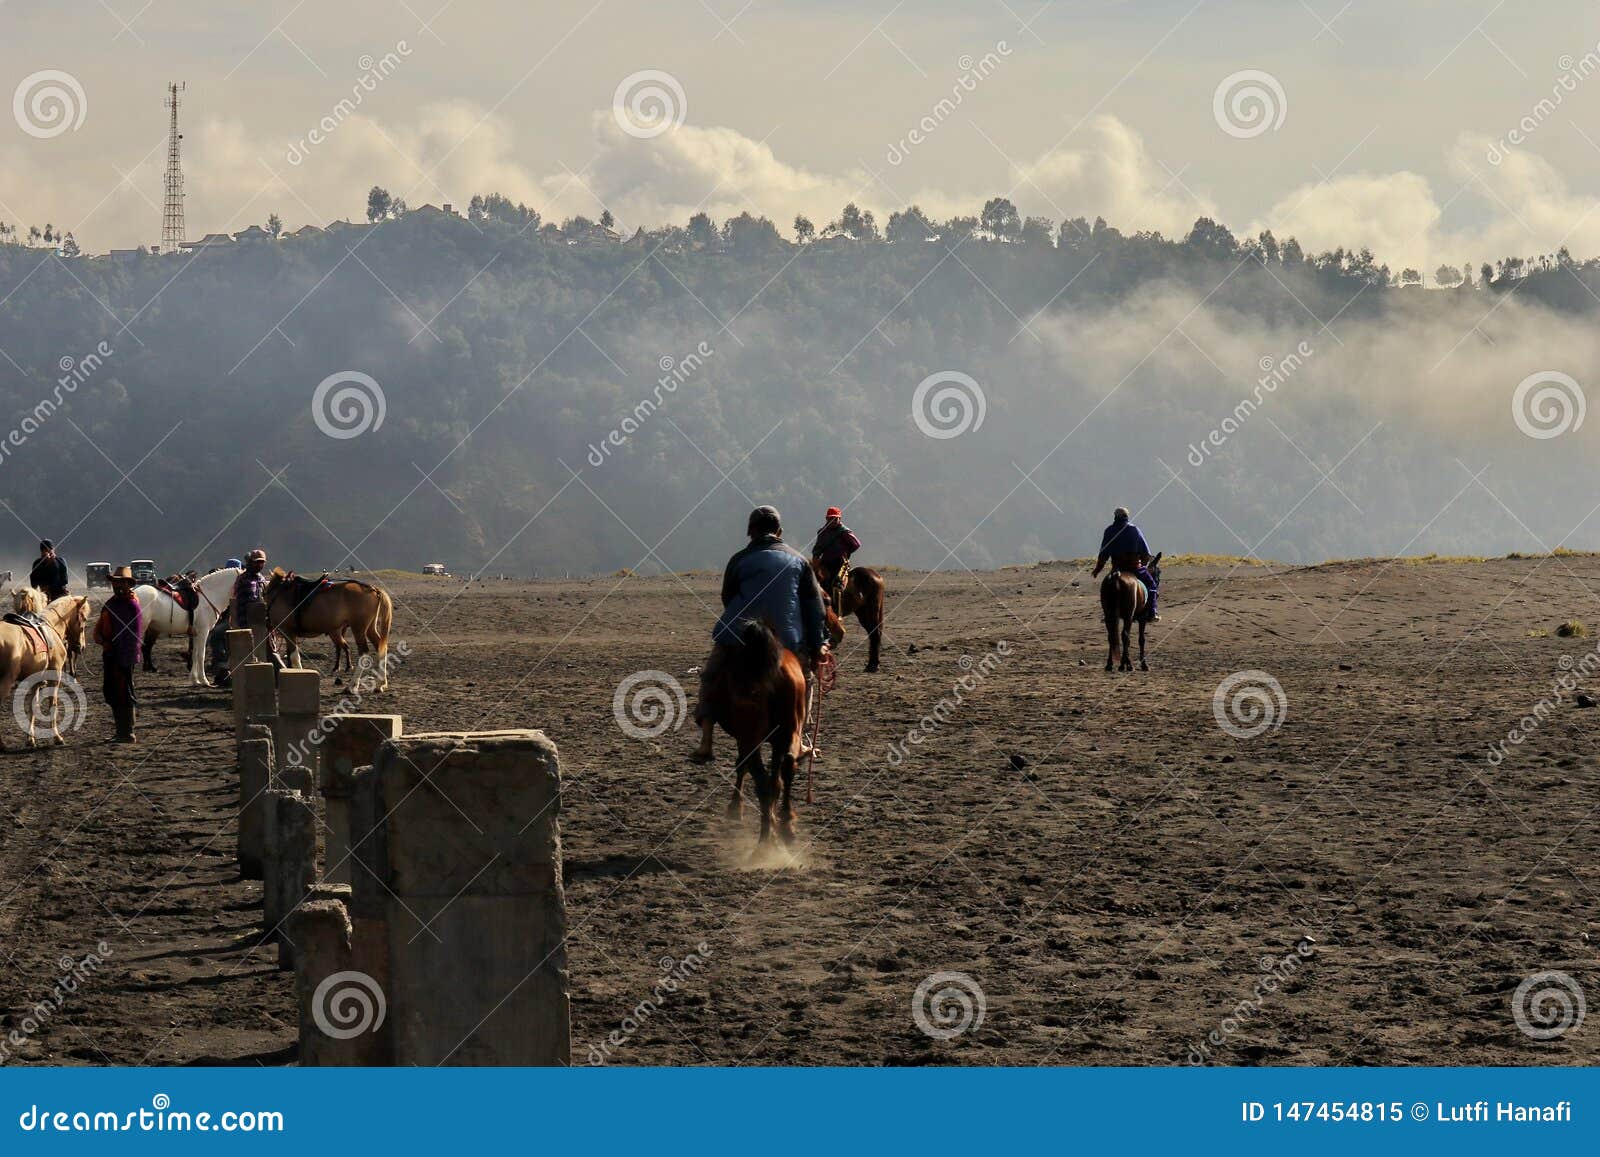 The Atmosphere Of The Bromo Mountains In The Morning, Which Is Cold And